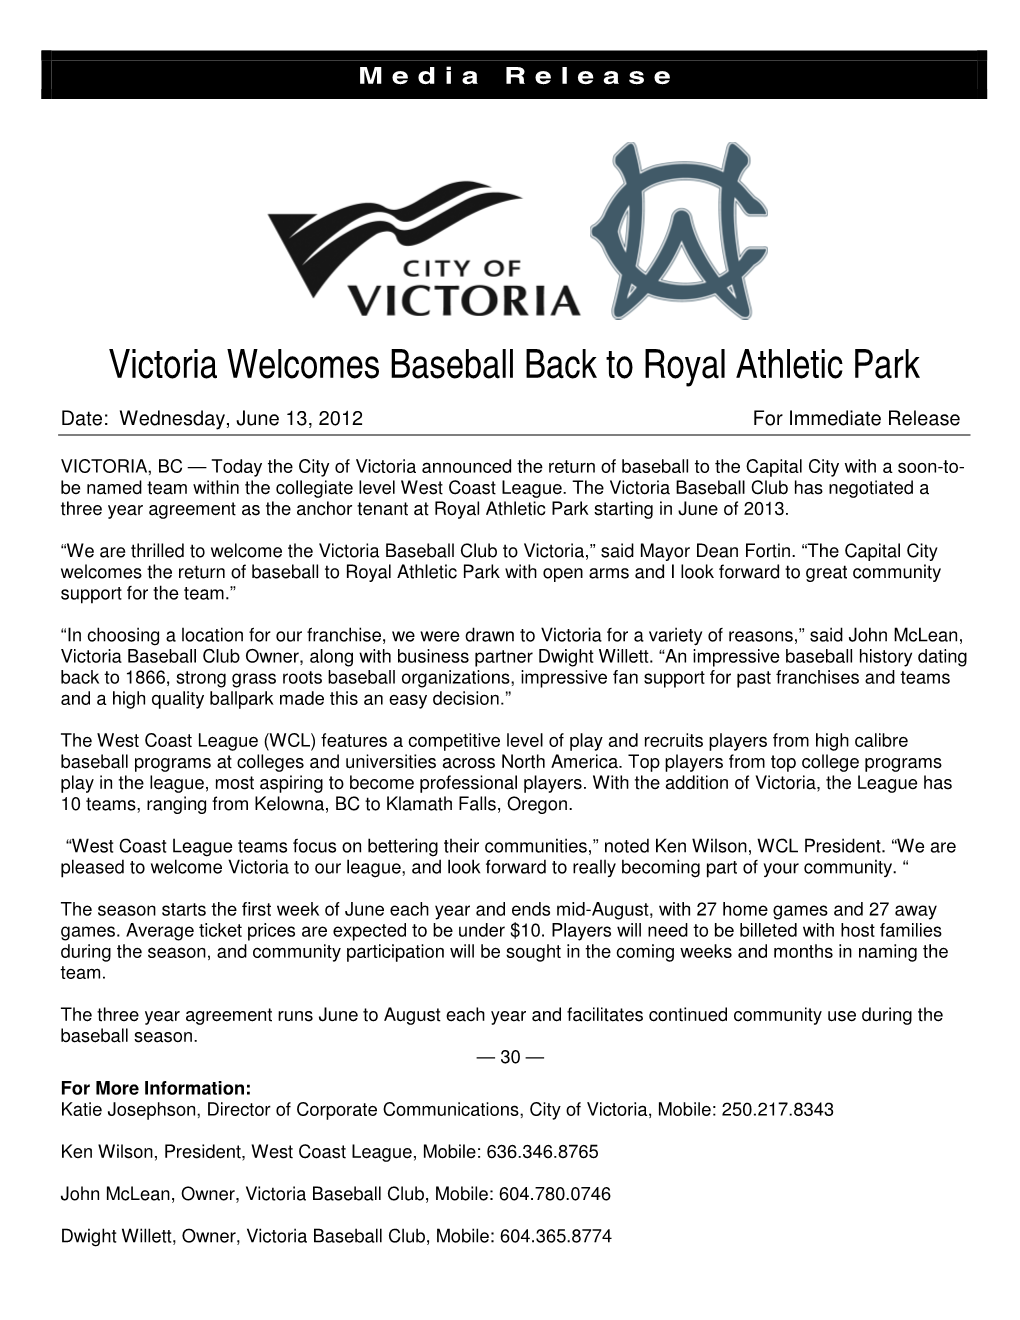 Victoria Welcomes Baseball Back to Royal Athletic Park